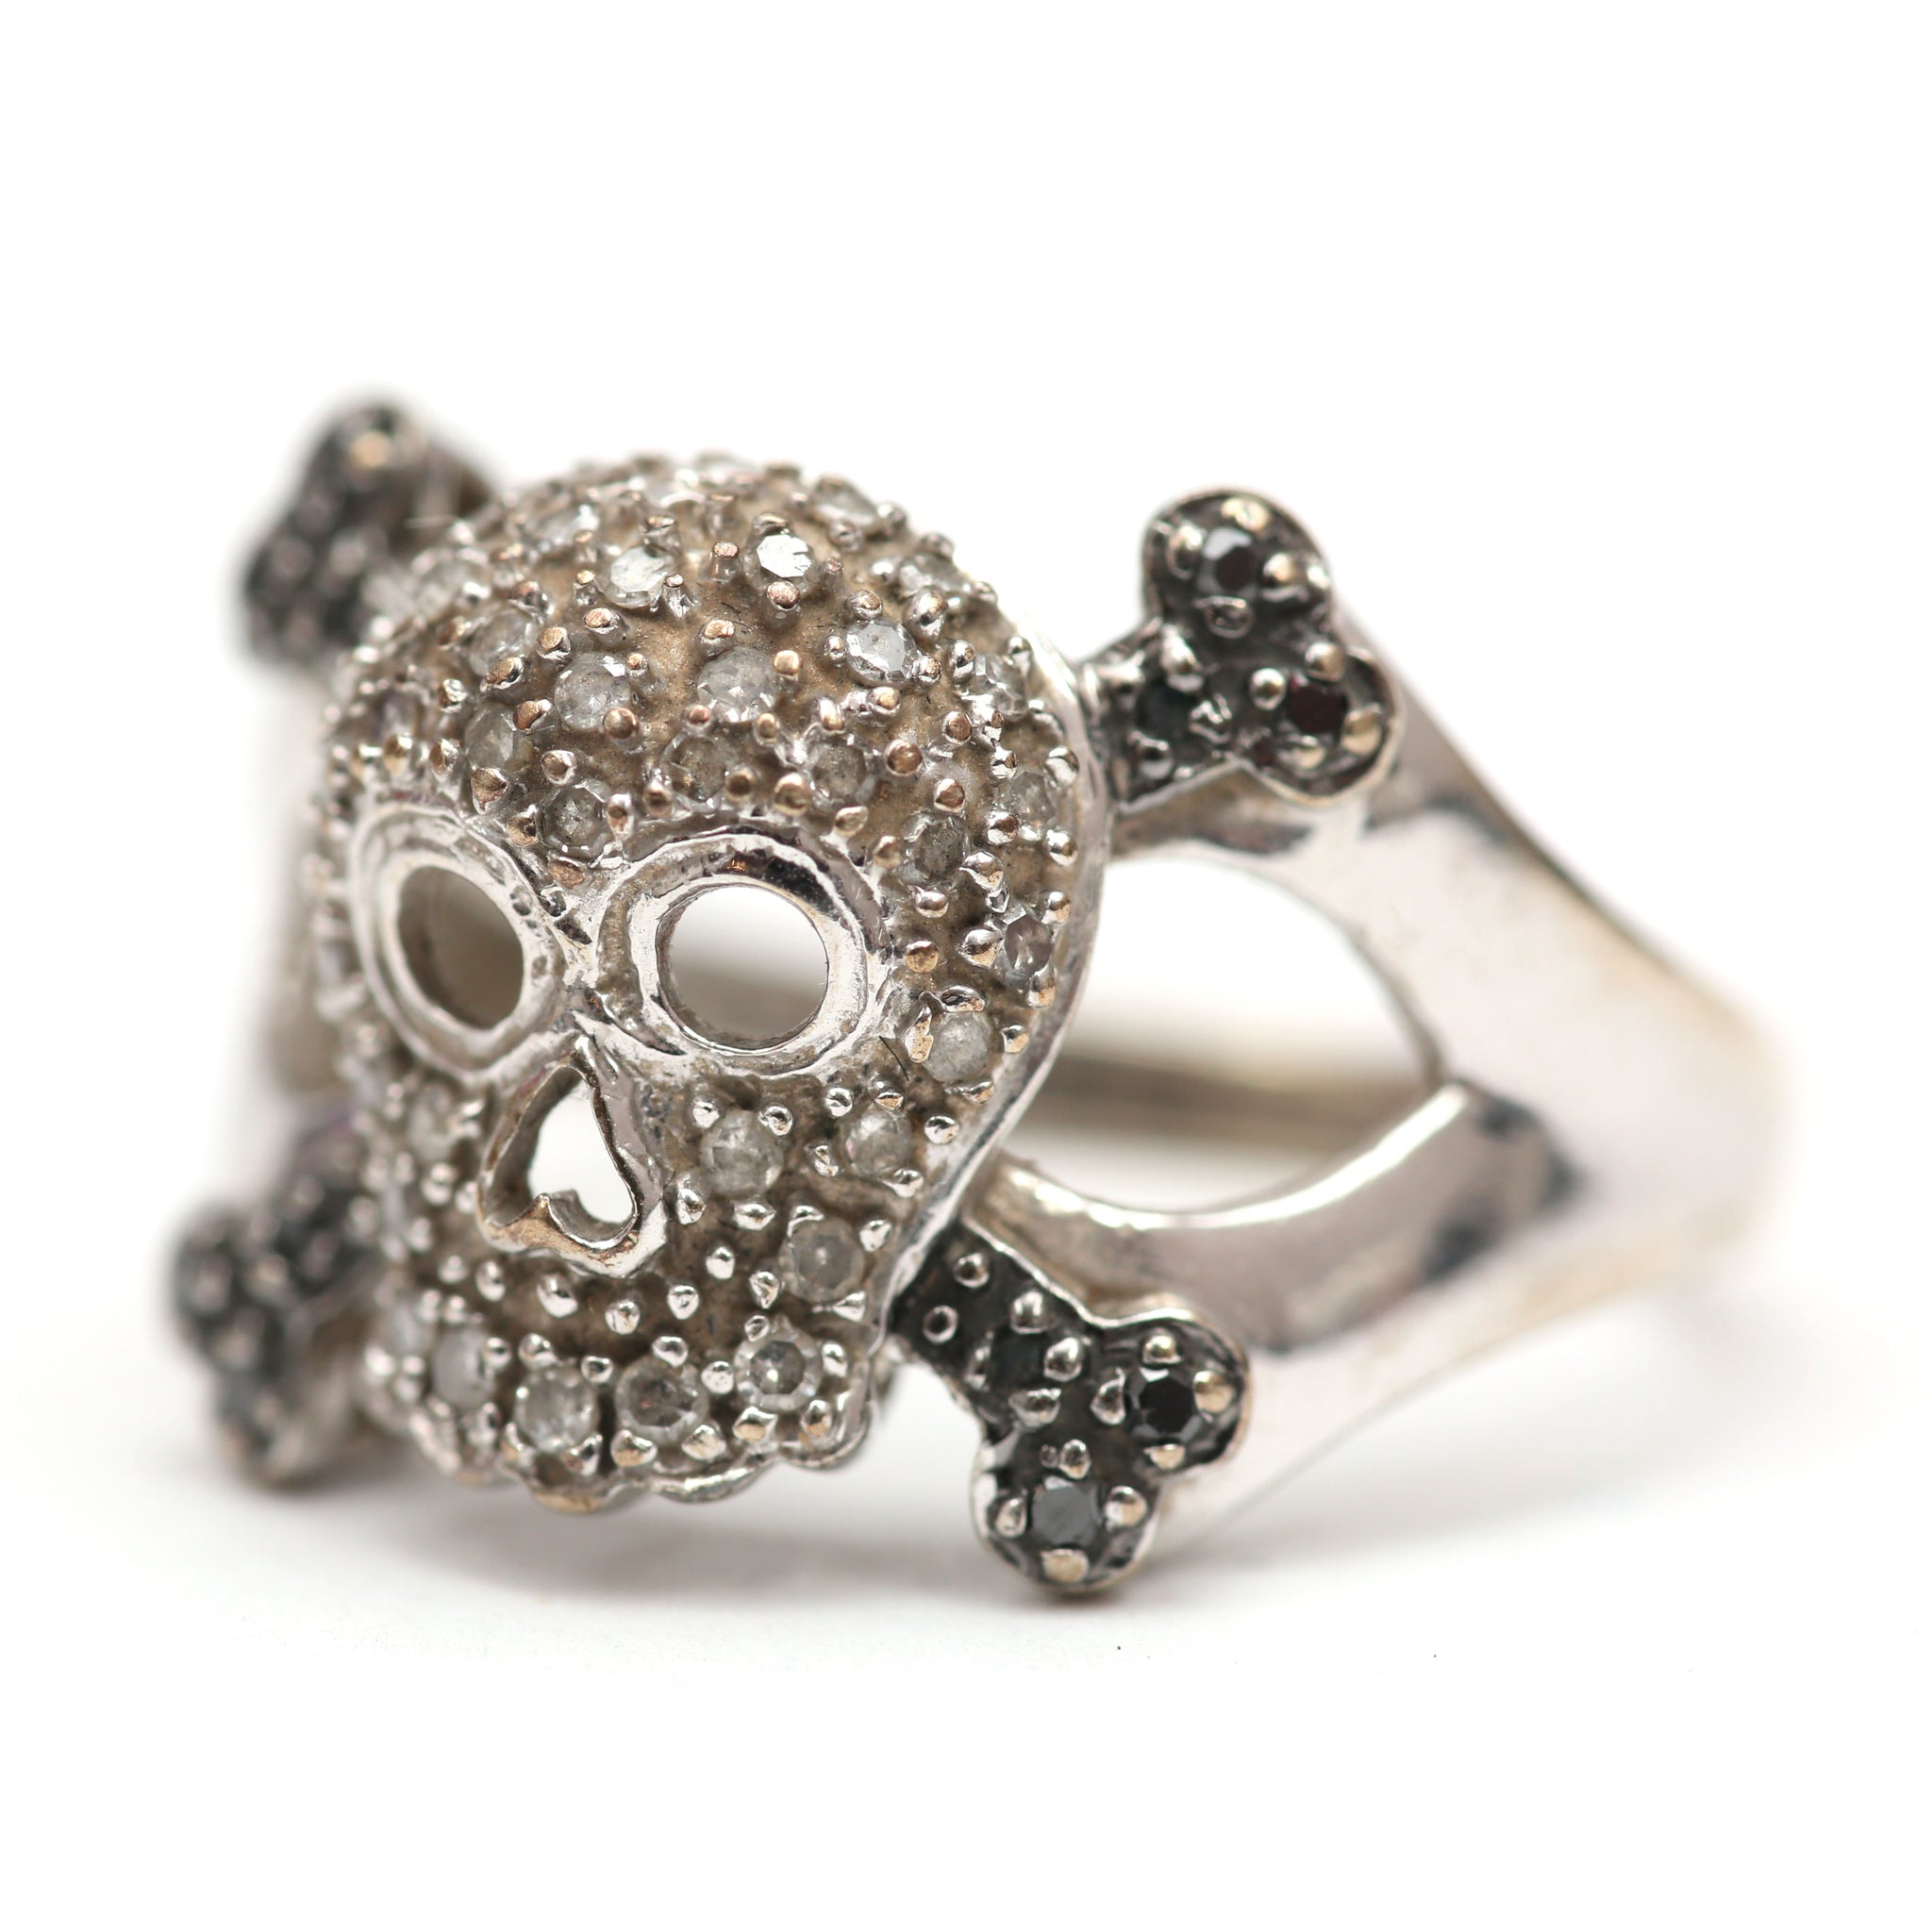 Buy Skull and Crossbones Ring Sterling Silver Personalized Pirate Ring  Online in India - Etsy